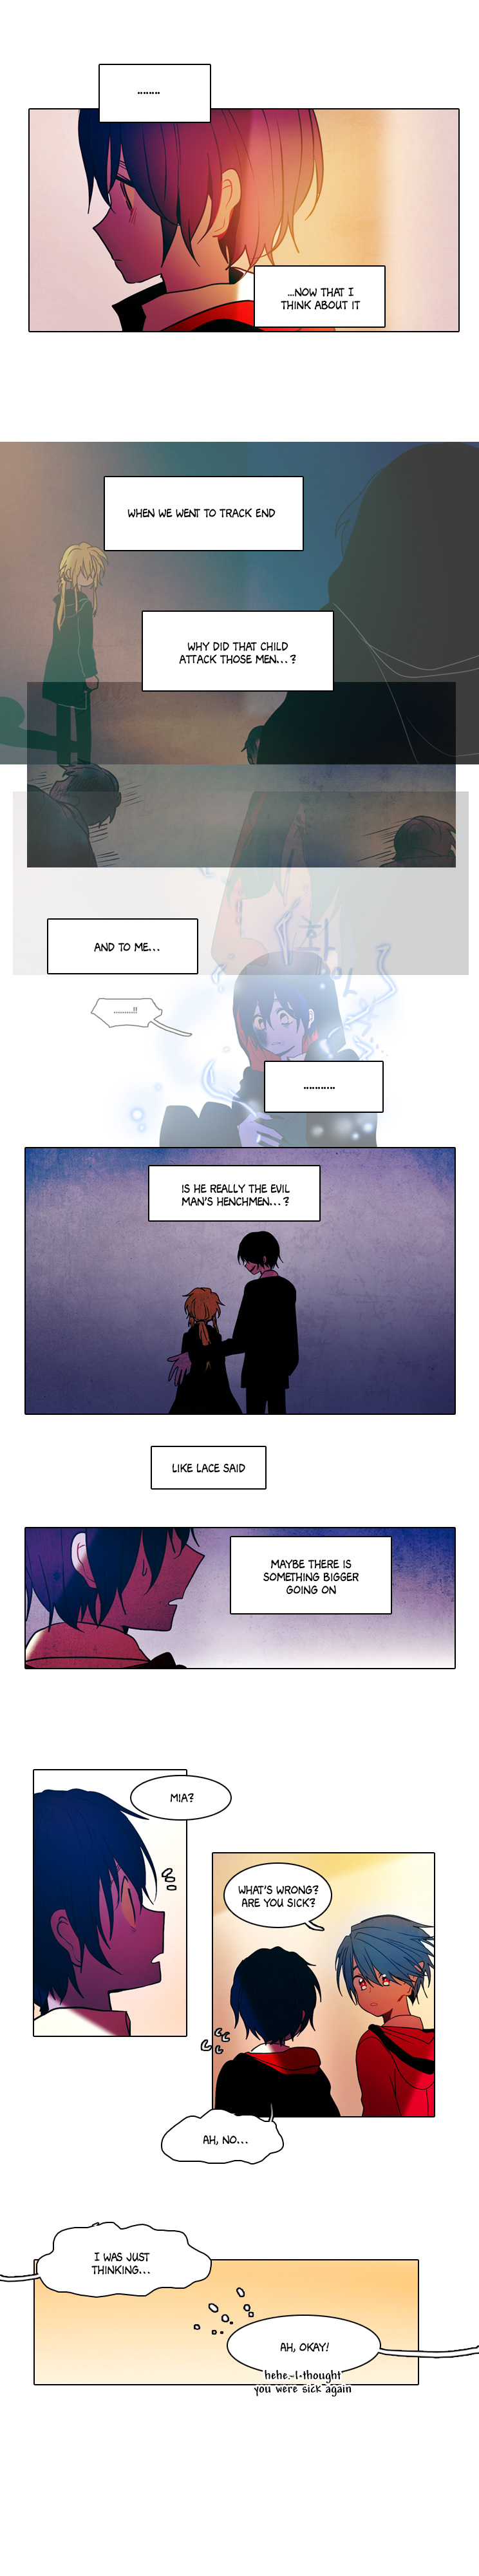 End And Save - Page 3